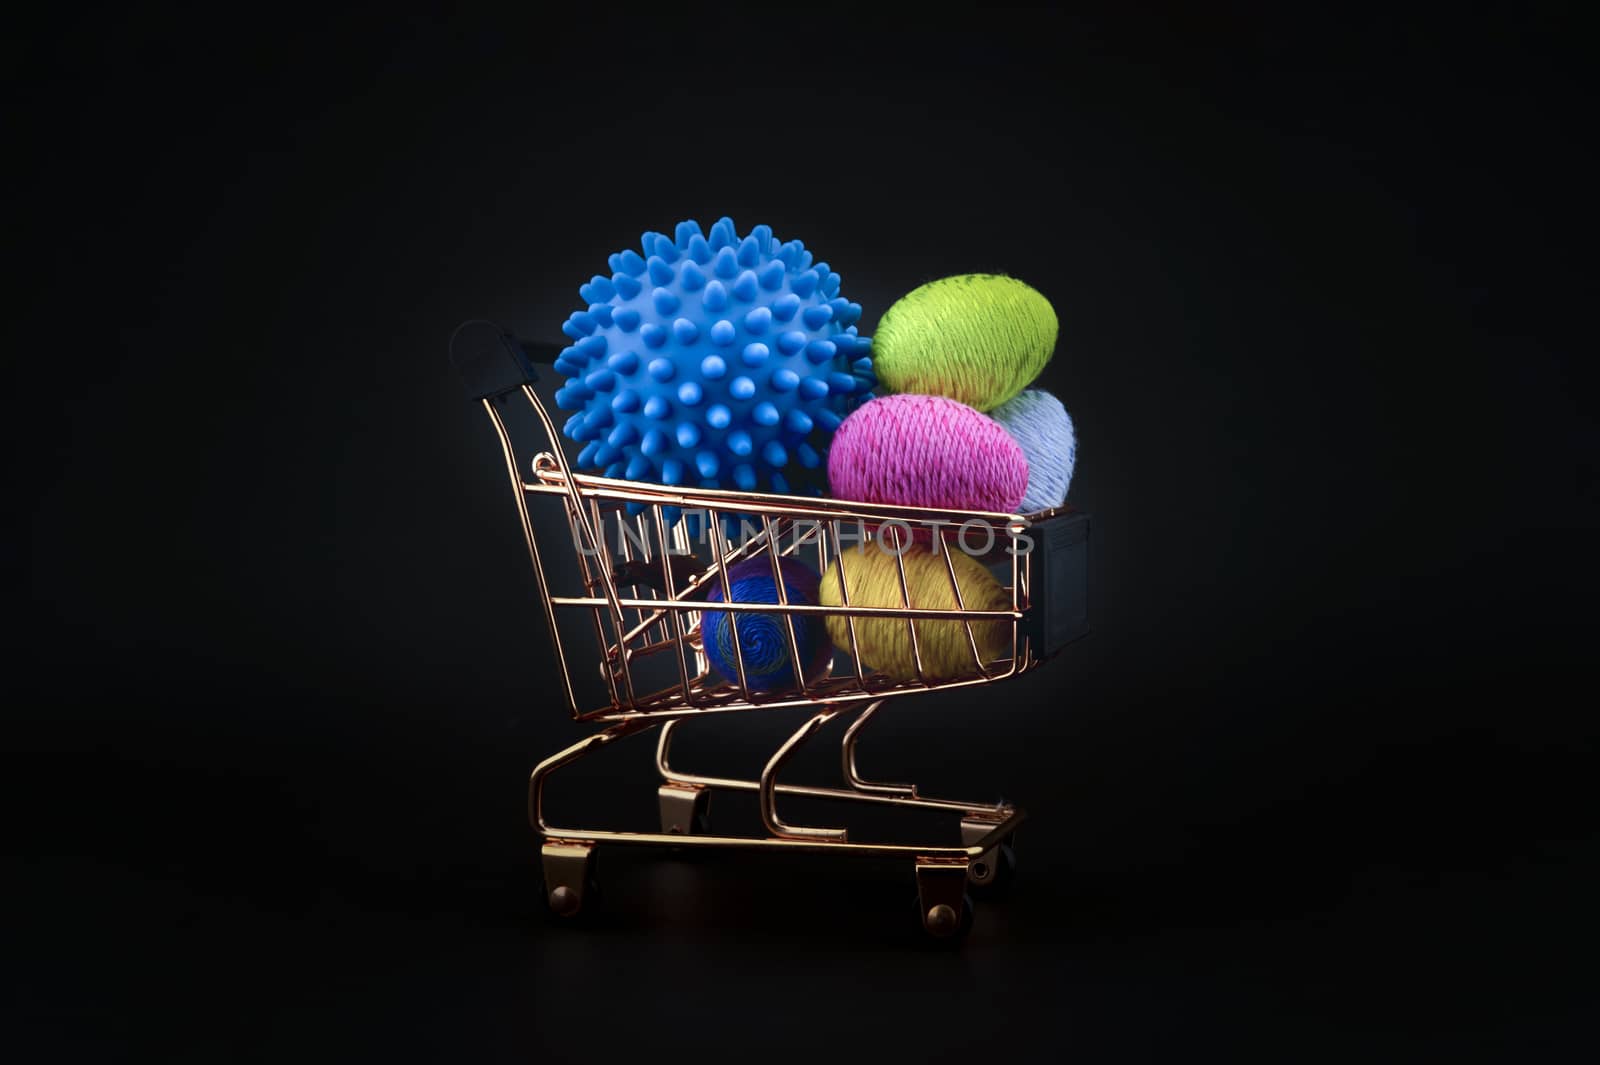 Virus molecule on a shopping cart and creative colorful eggs made from yarn conceptual of the possibility of infection with corona virus or Covid-19 over a black background